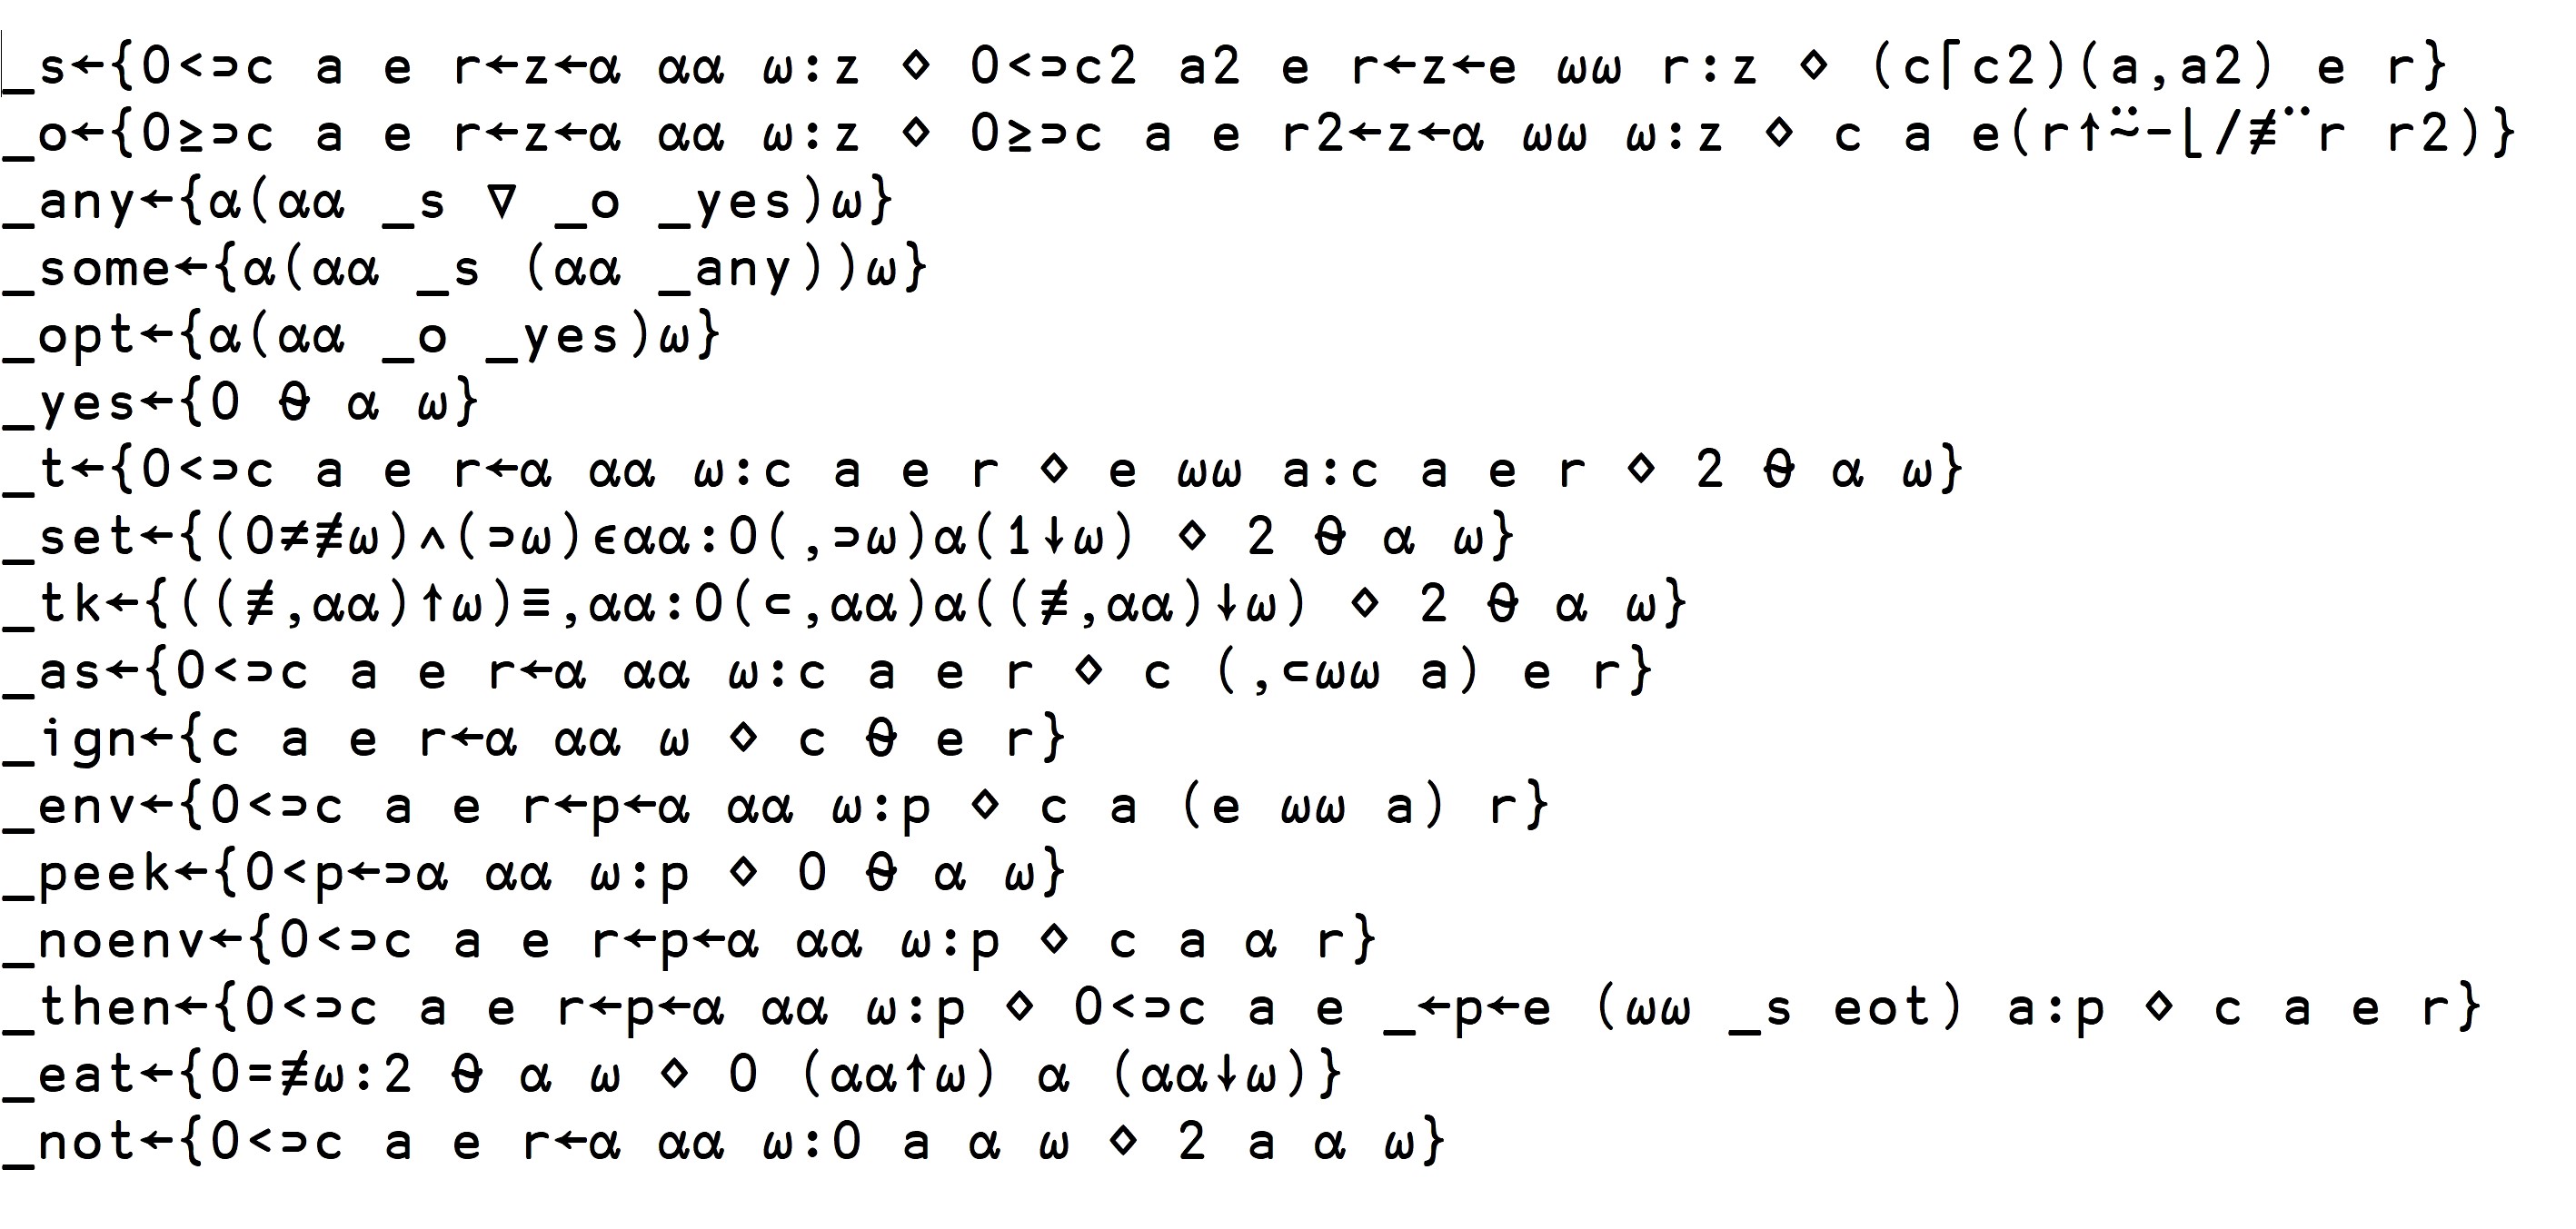 A page of APL code.  The code contains almost entirely symbols and is impossible to read for anyone unfamiliar with APL